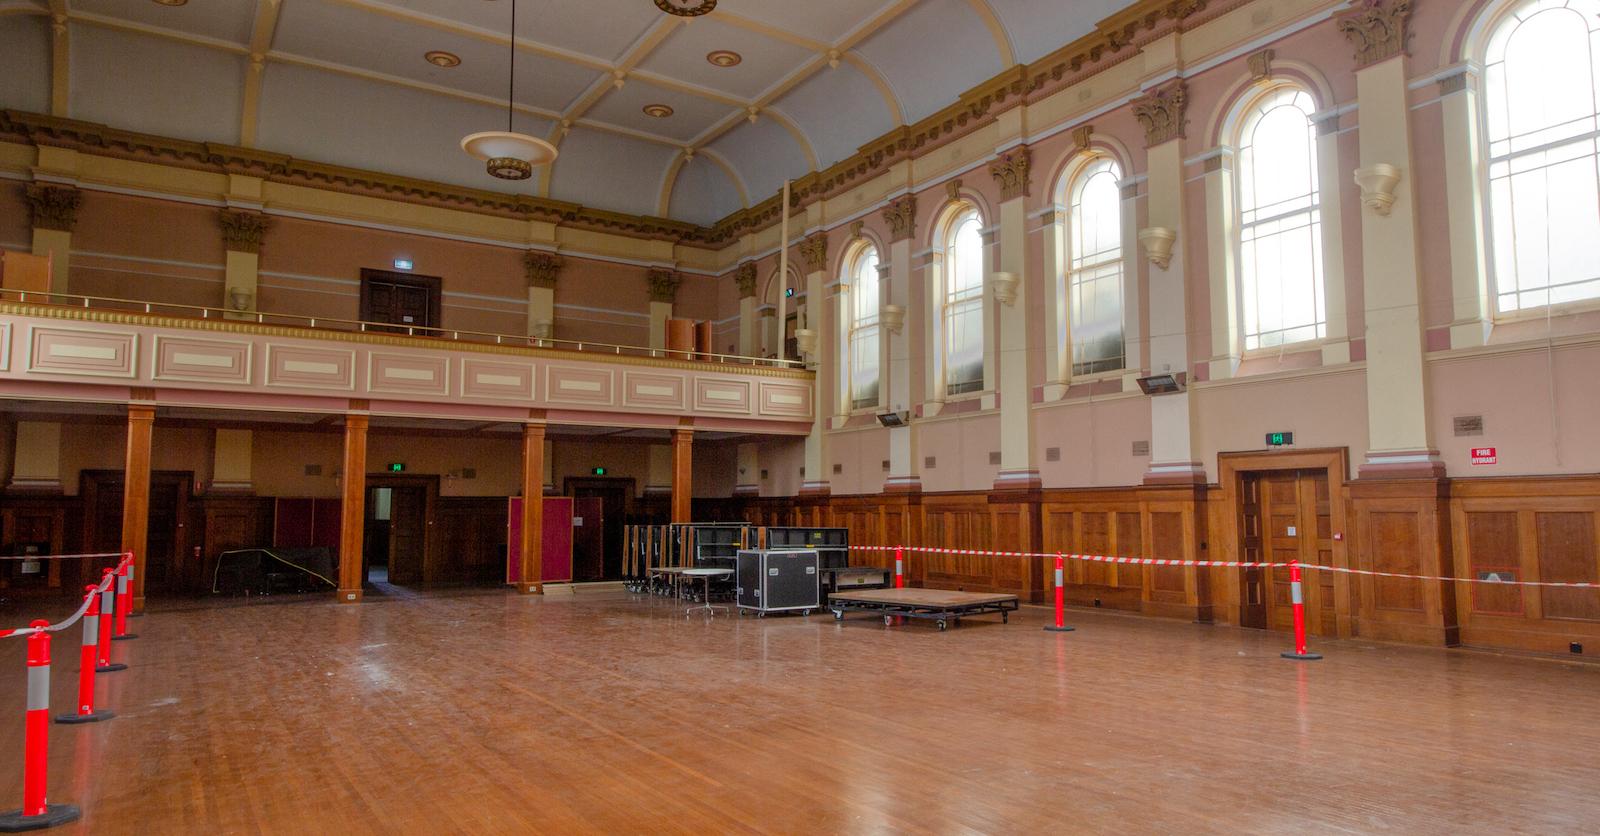 The Main Hall, currently empty and in need of maintenance